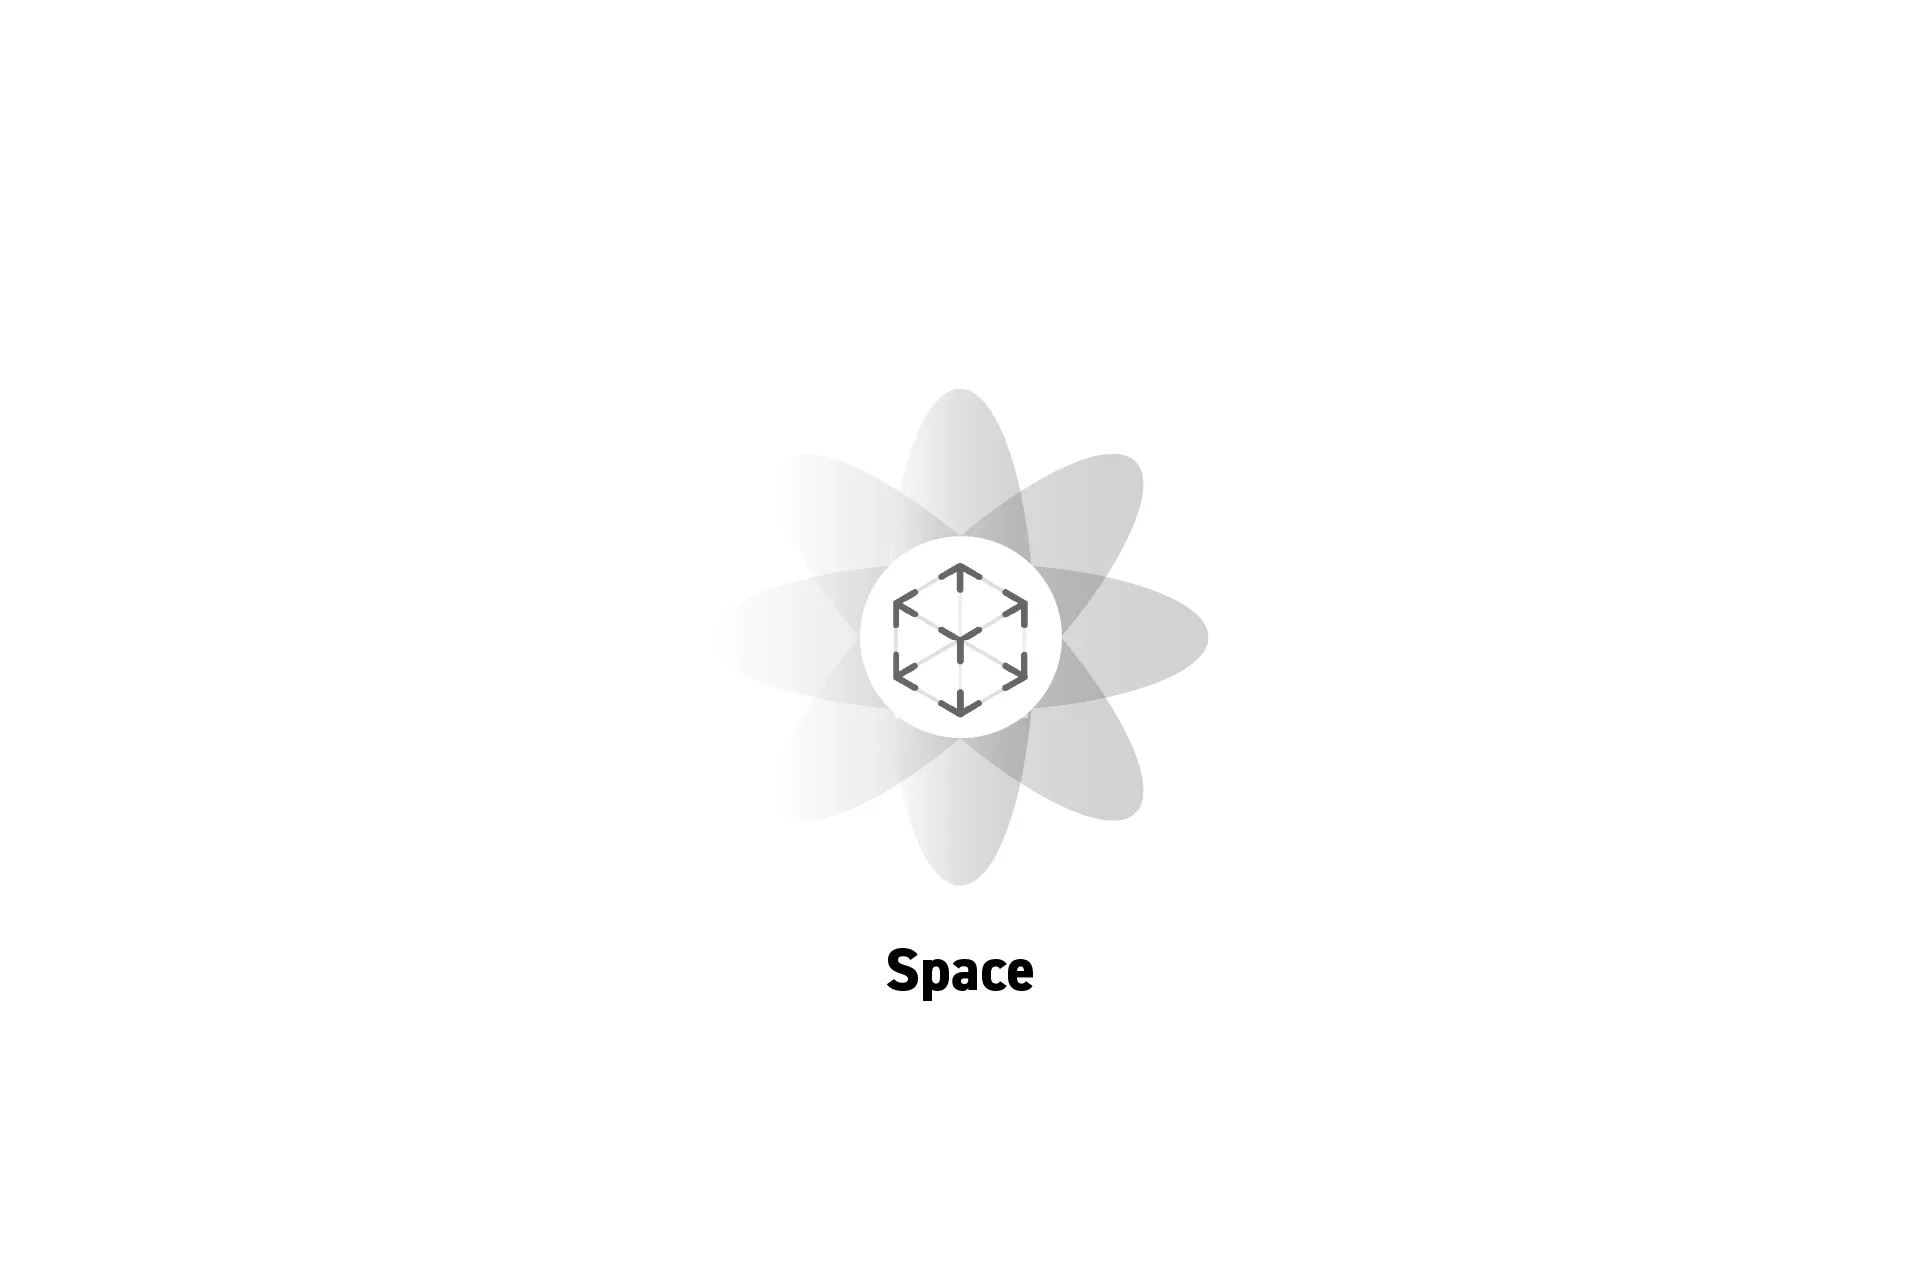 A flower that represents spatial computing with the text "Space" beneath it.